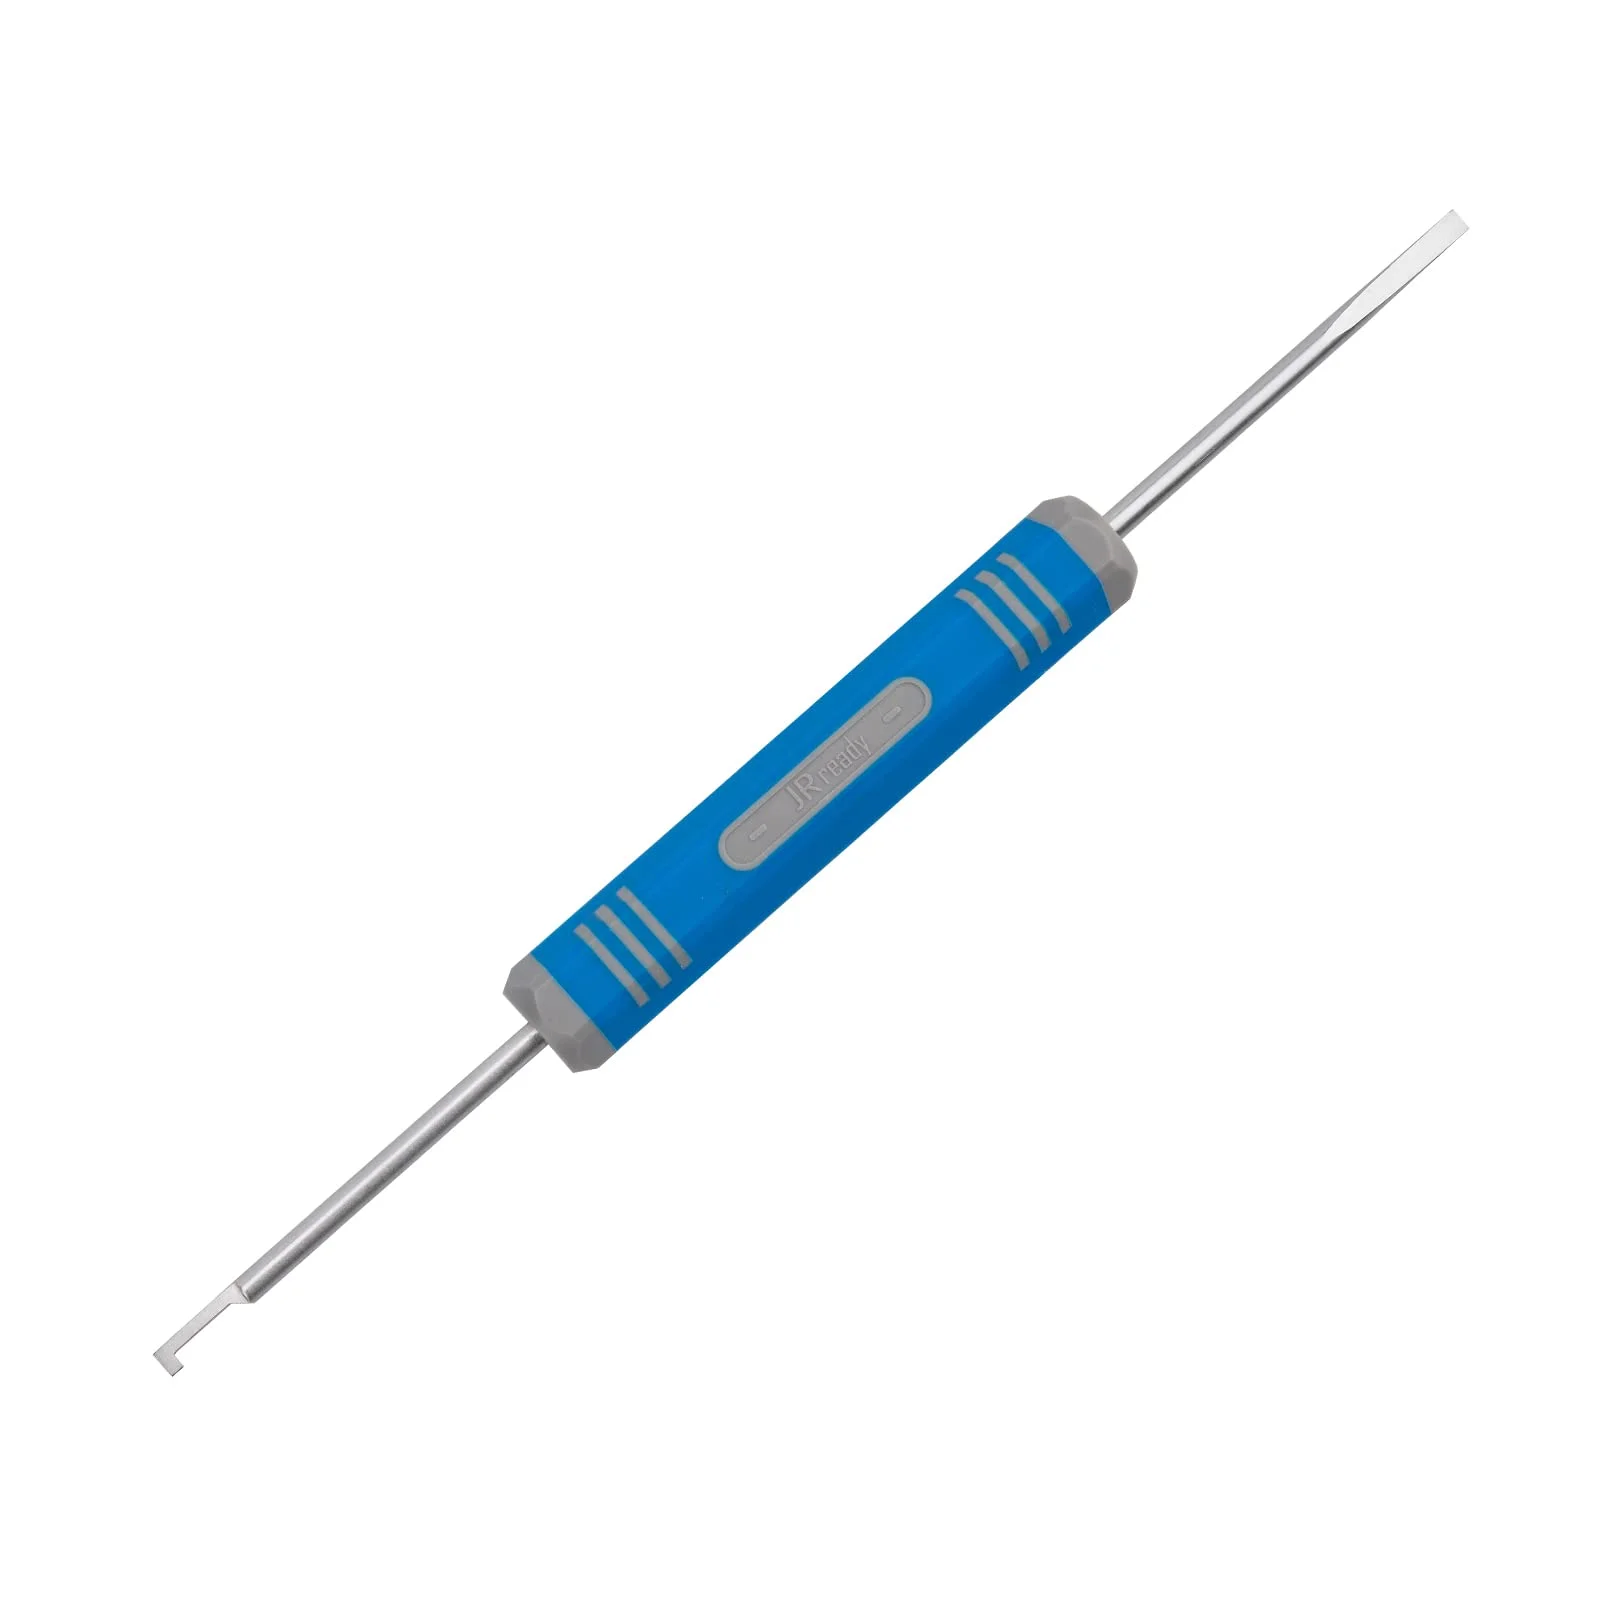 JRready DRK-RT1B Deutsch Contacts Pin removal tool,2 in 1 Pin Extraction Tools,Suitable for DT, DTM, DTV, DRB, DRCP Connectors